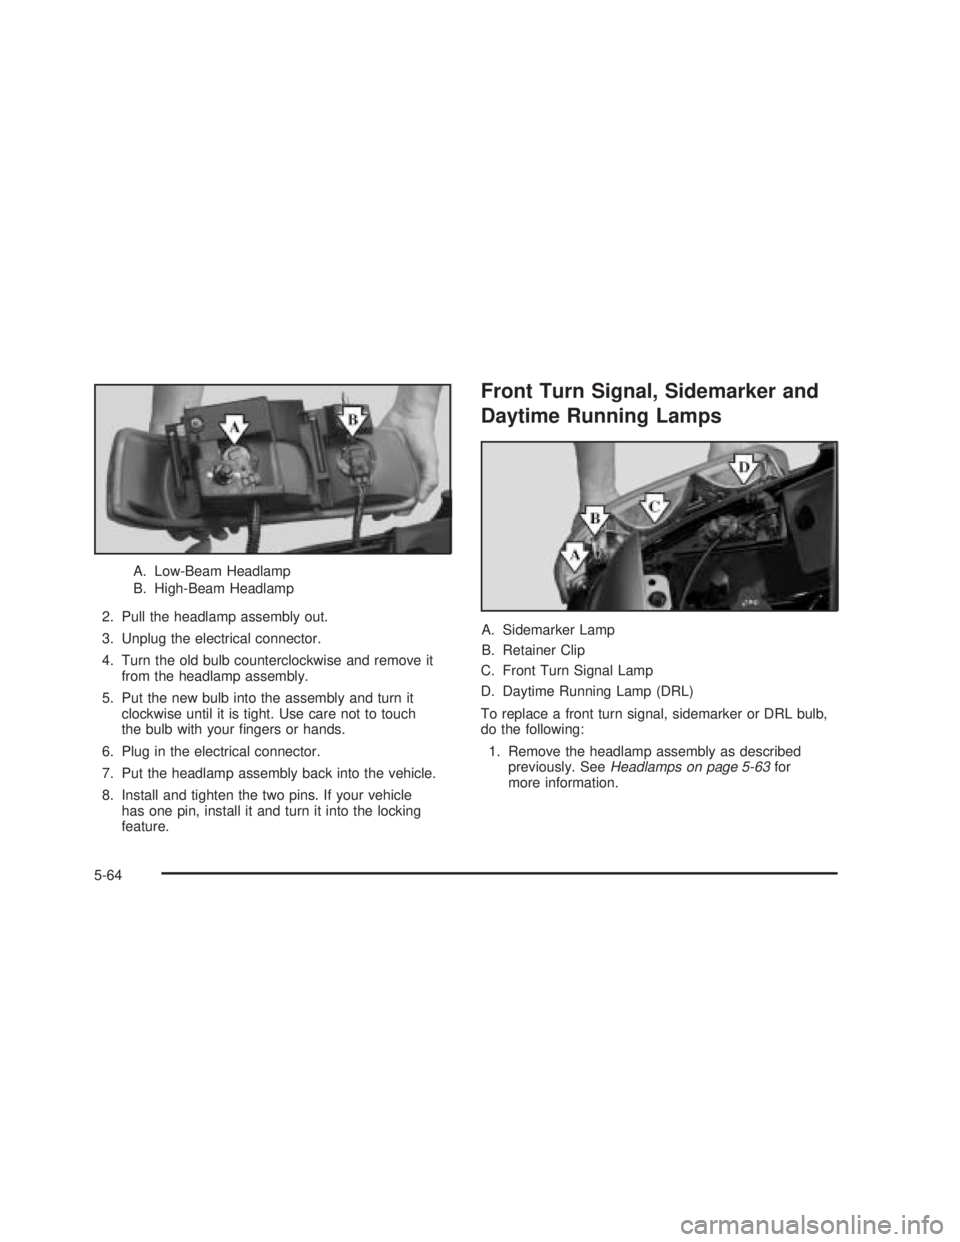 GMC SIERRA 2005  Owners Manual A. Low-Beam Headlamp
B. High-Beam Headlamp
2. Pull the headlamp assembly out.
3. Unplug the electrical connector.
4. Turn the old bulb counterclockwise and remove it
from the headlamp assembly.
5. Put